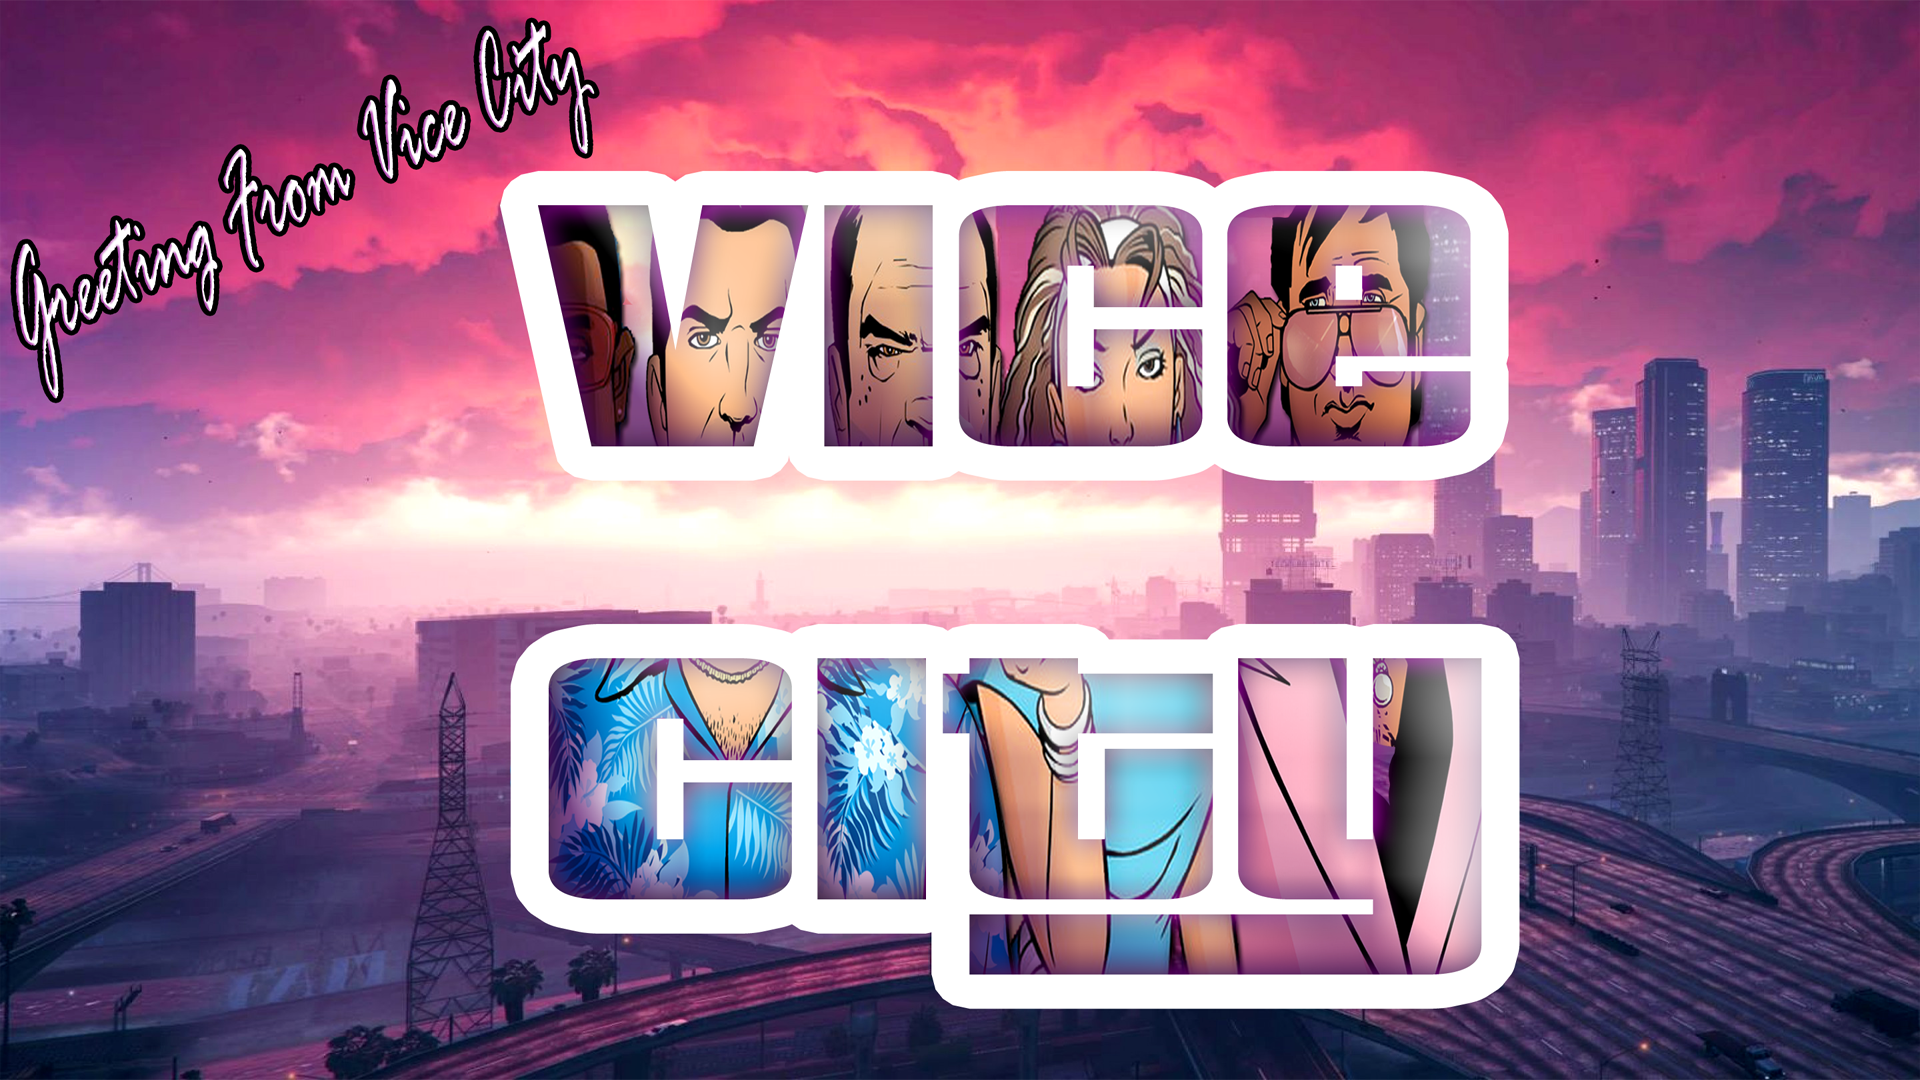 Outro make 3 image - GTA VC - Background Edition [Remastered 2K20] mod for Grand  Theft Auto: Vice City - Mod DB